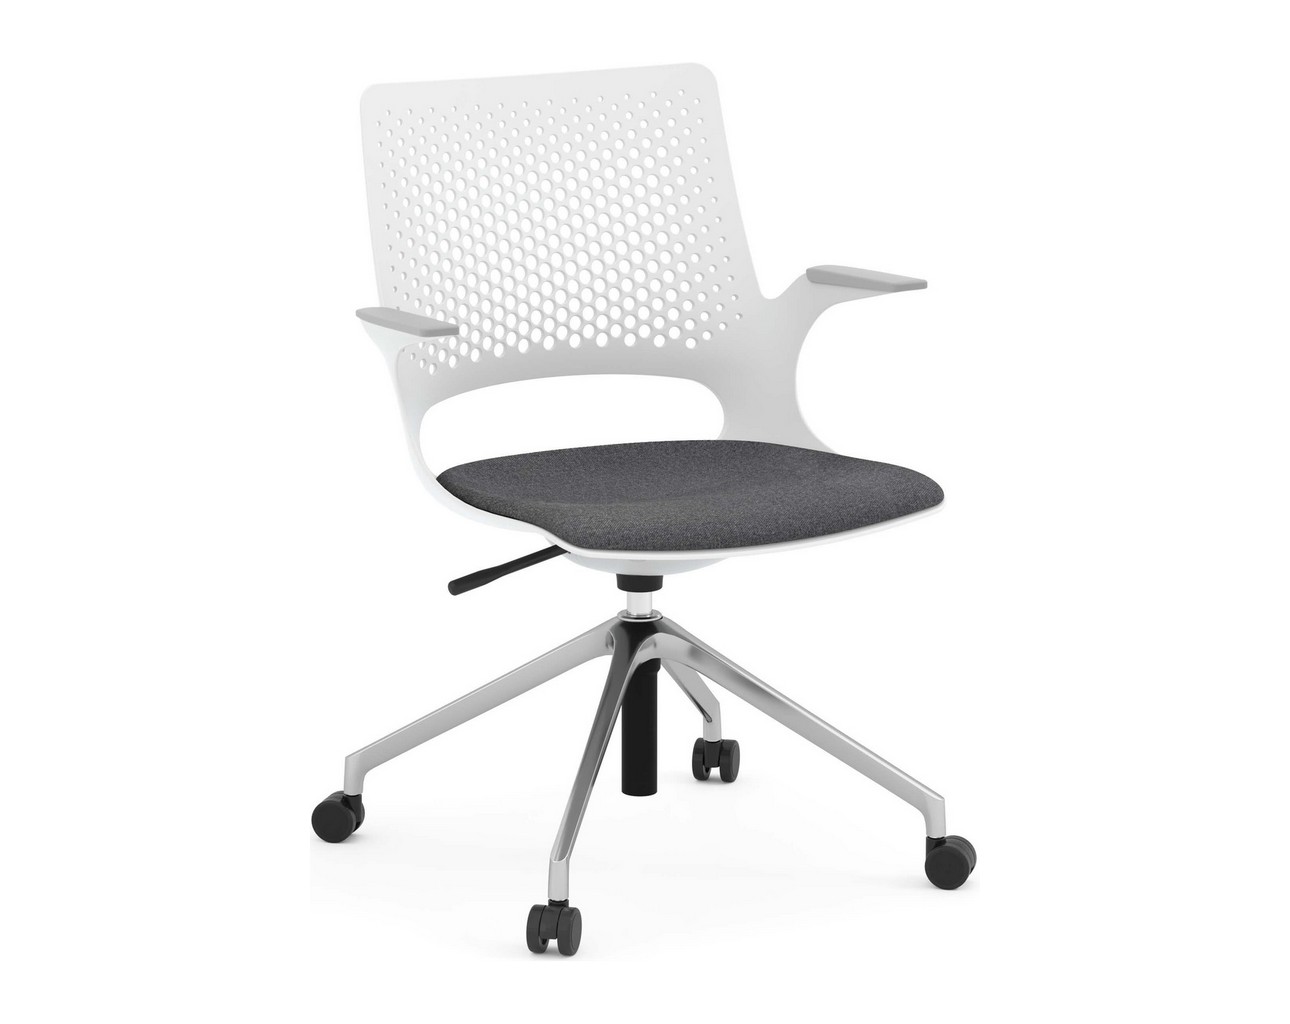 Harmony Multi-Purpose Chair – Polished Aluminum Base and Light Grey Frame with Grey Seat